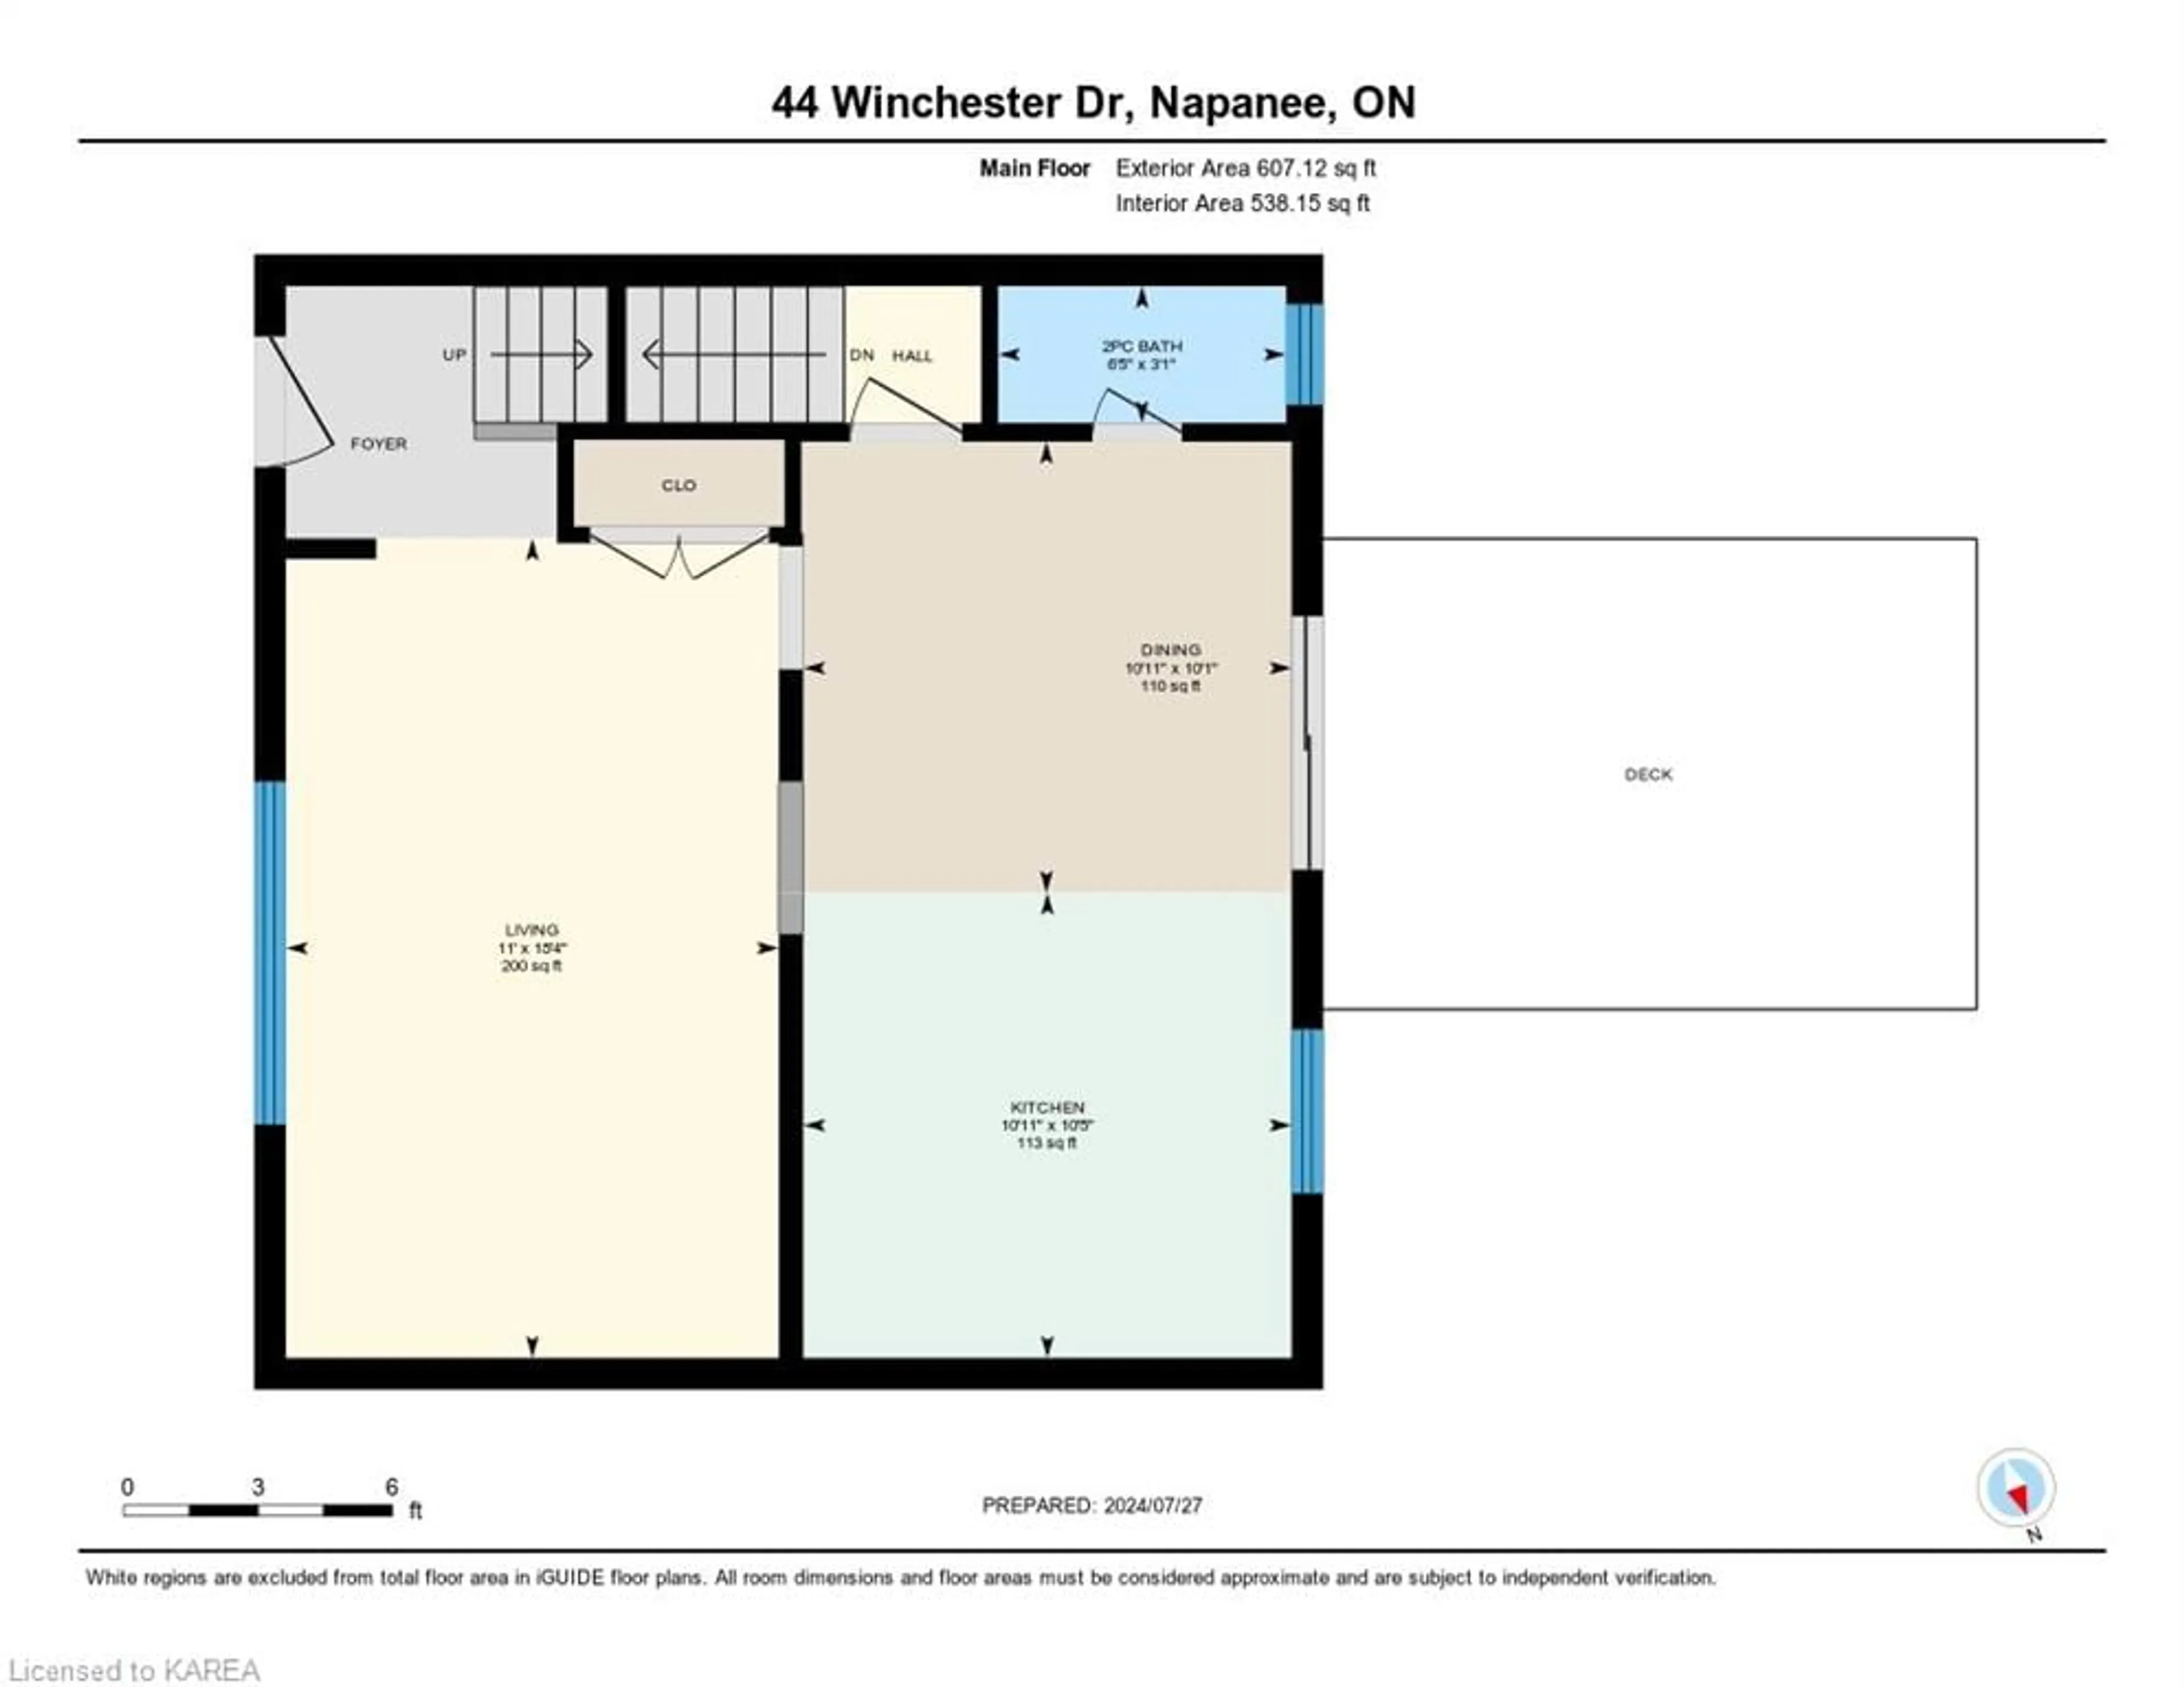 Floor plan for 44 Winchester Dr, Napanee Ontario K7R 3R2